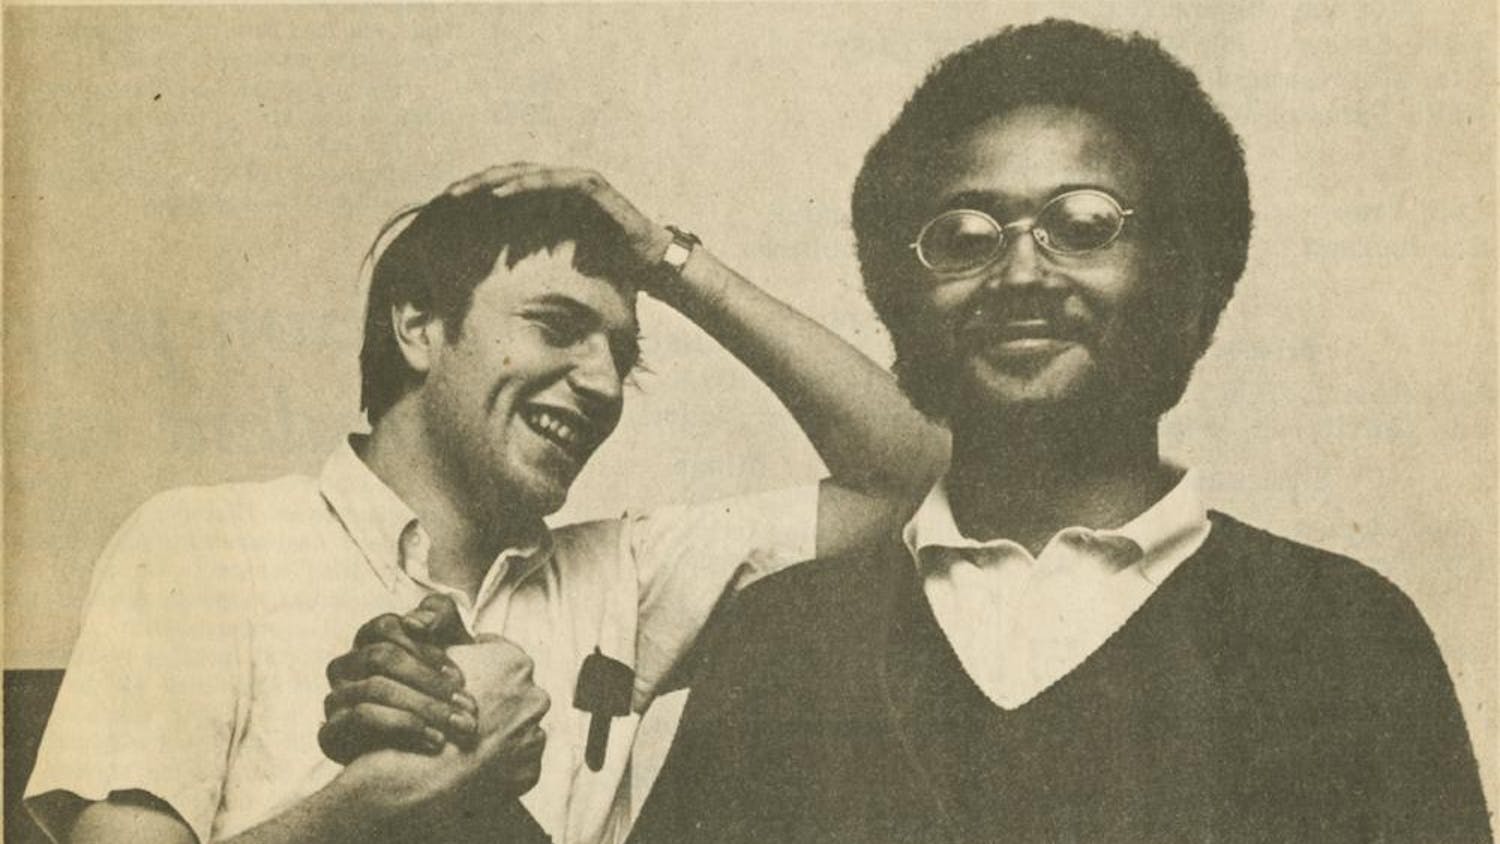 Keith Parker, pictured on the right, was the student body president of IU during the 1970-71 term. Parker was a member of the Black Panther Party.&nbsp;